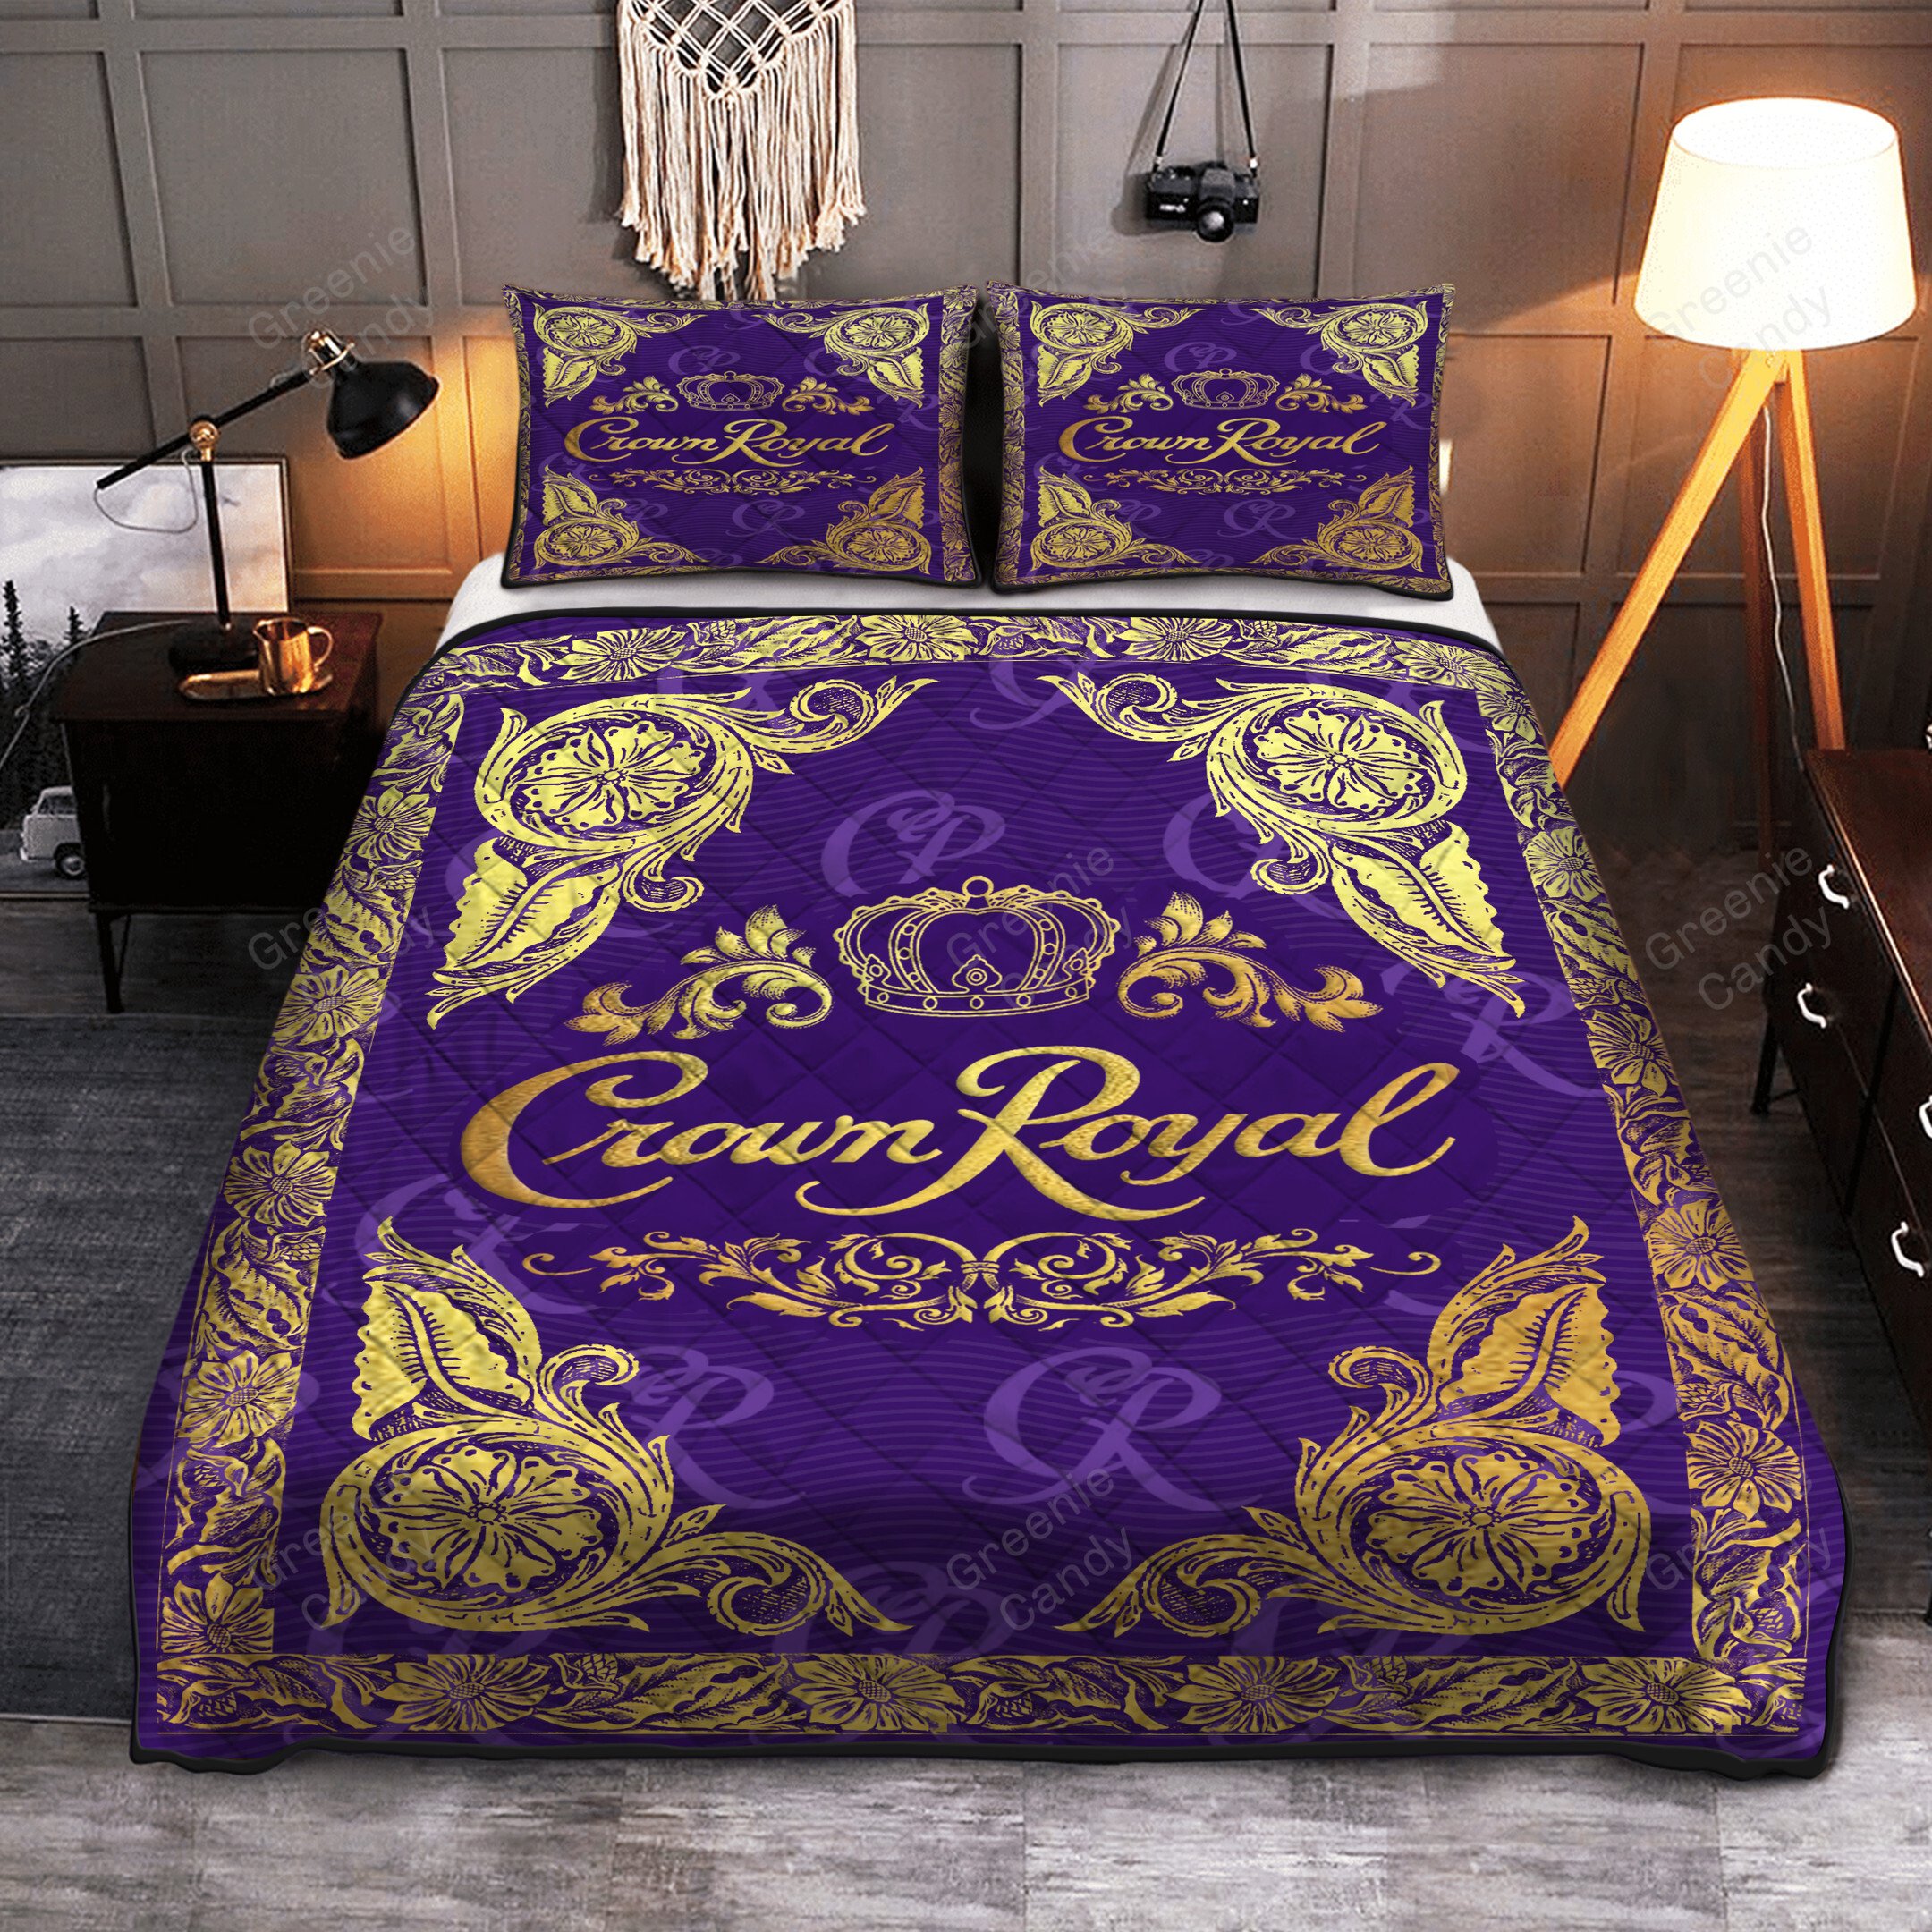 Crown Royal Deluxe Whisky quilt bedding set